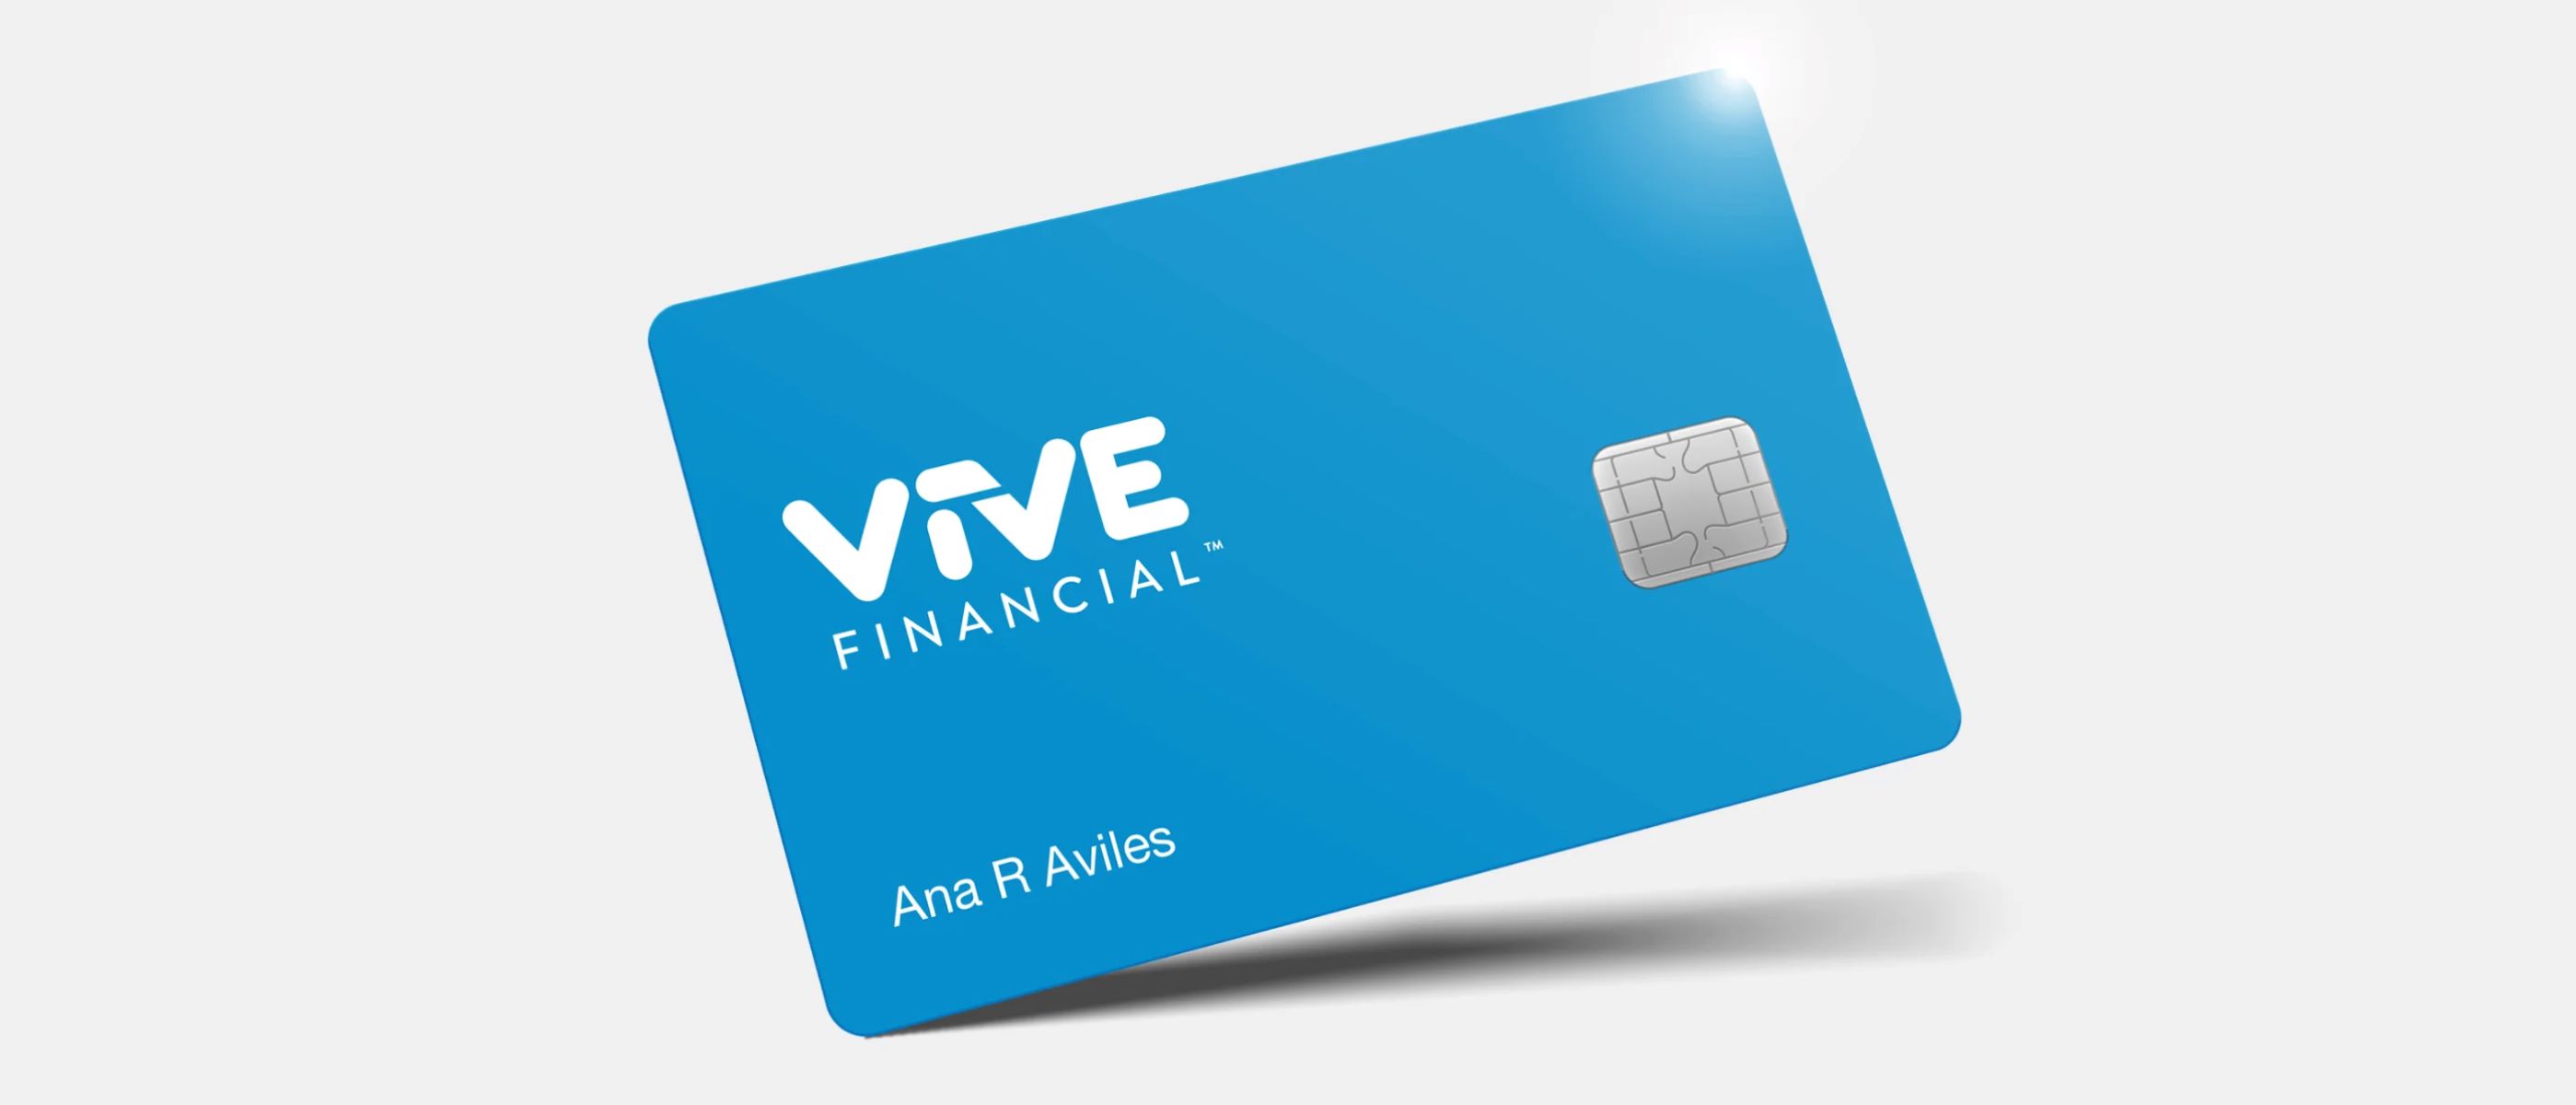 Where Can I Use Vive Credit Card